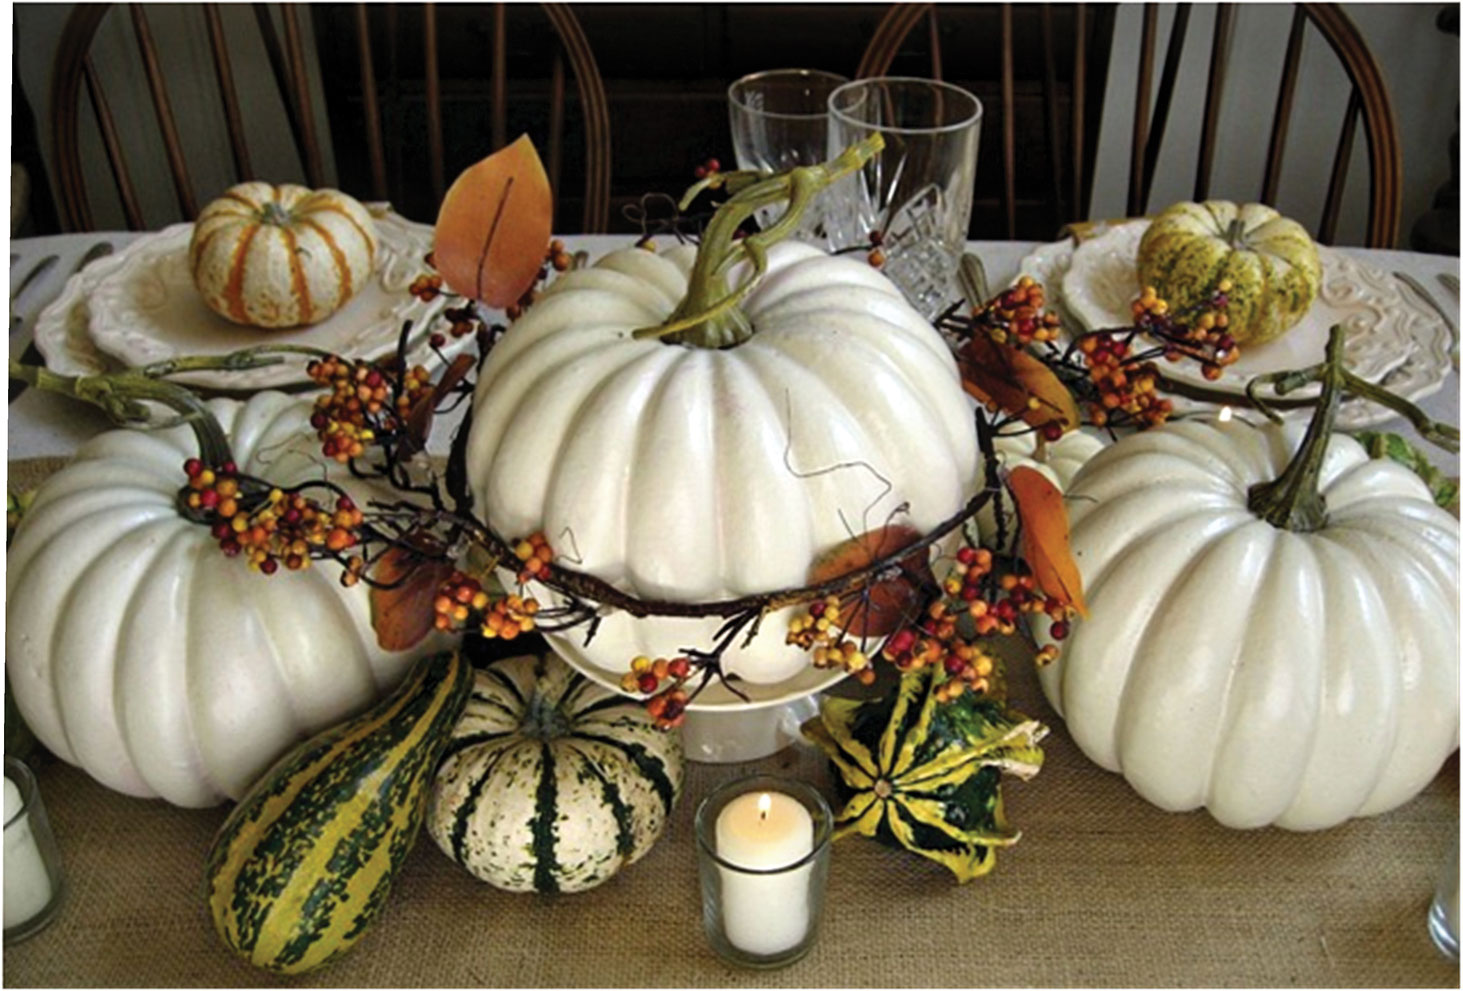 A Thanksgiving themed tablescape